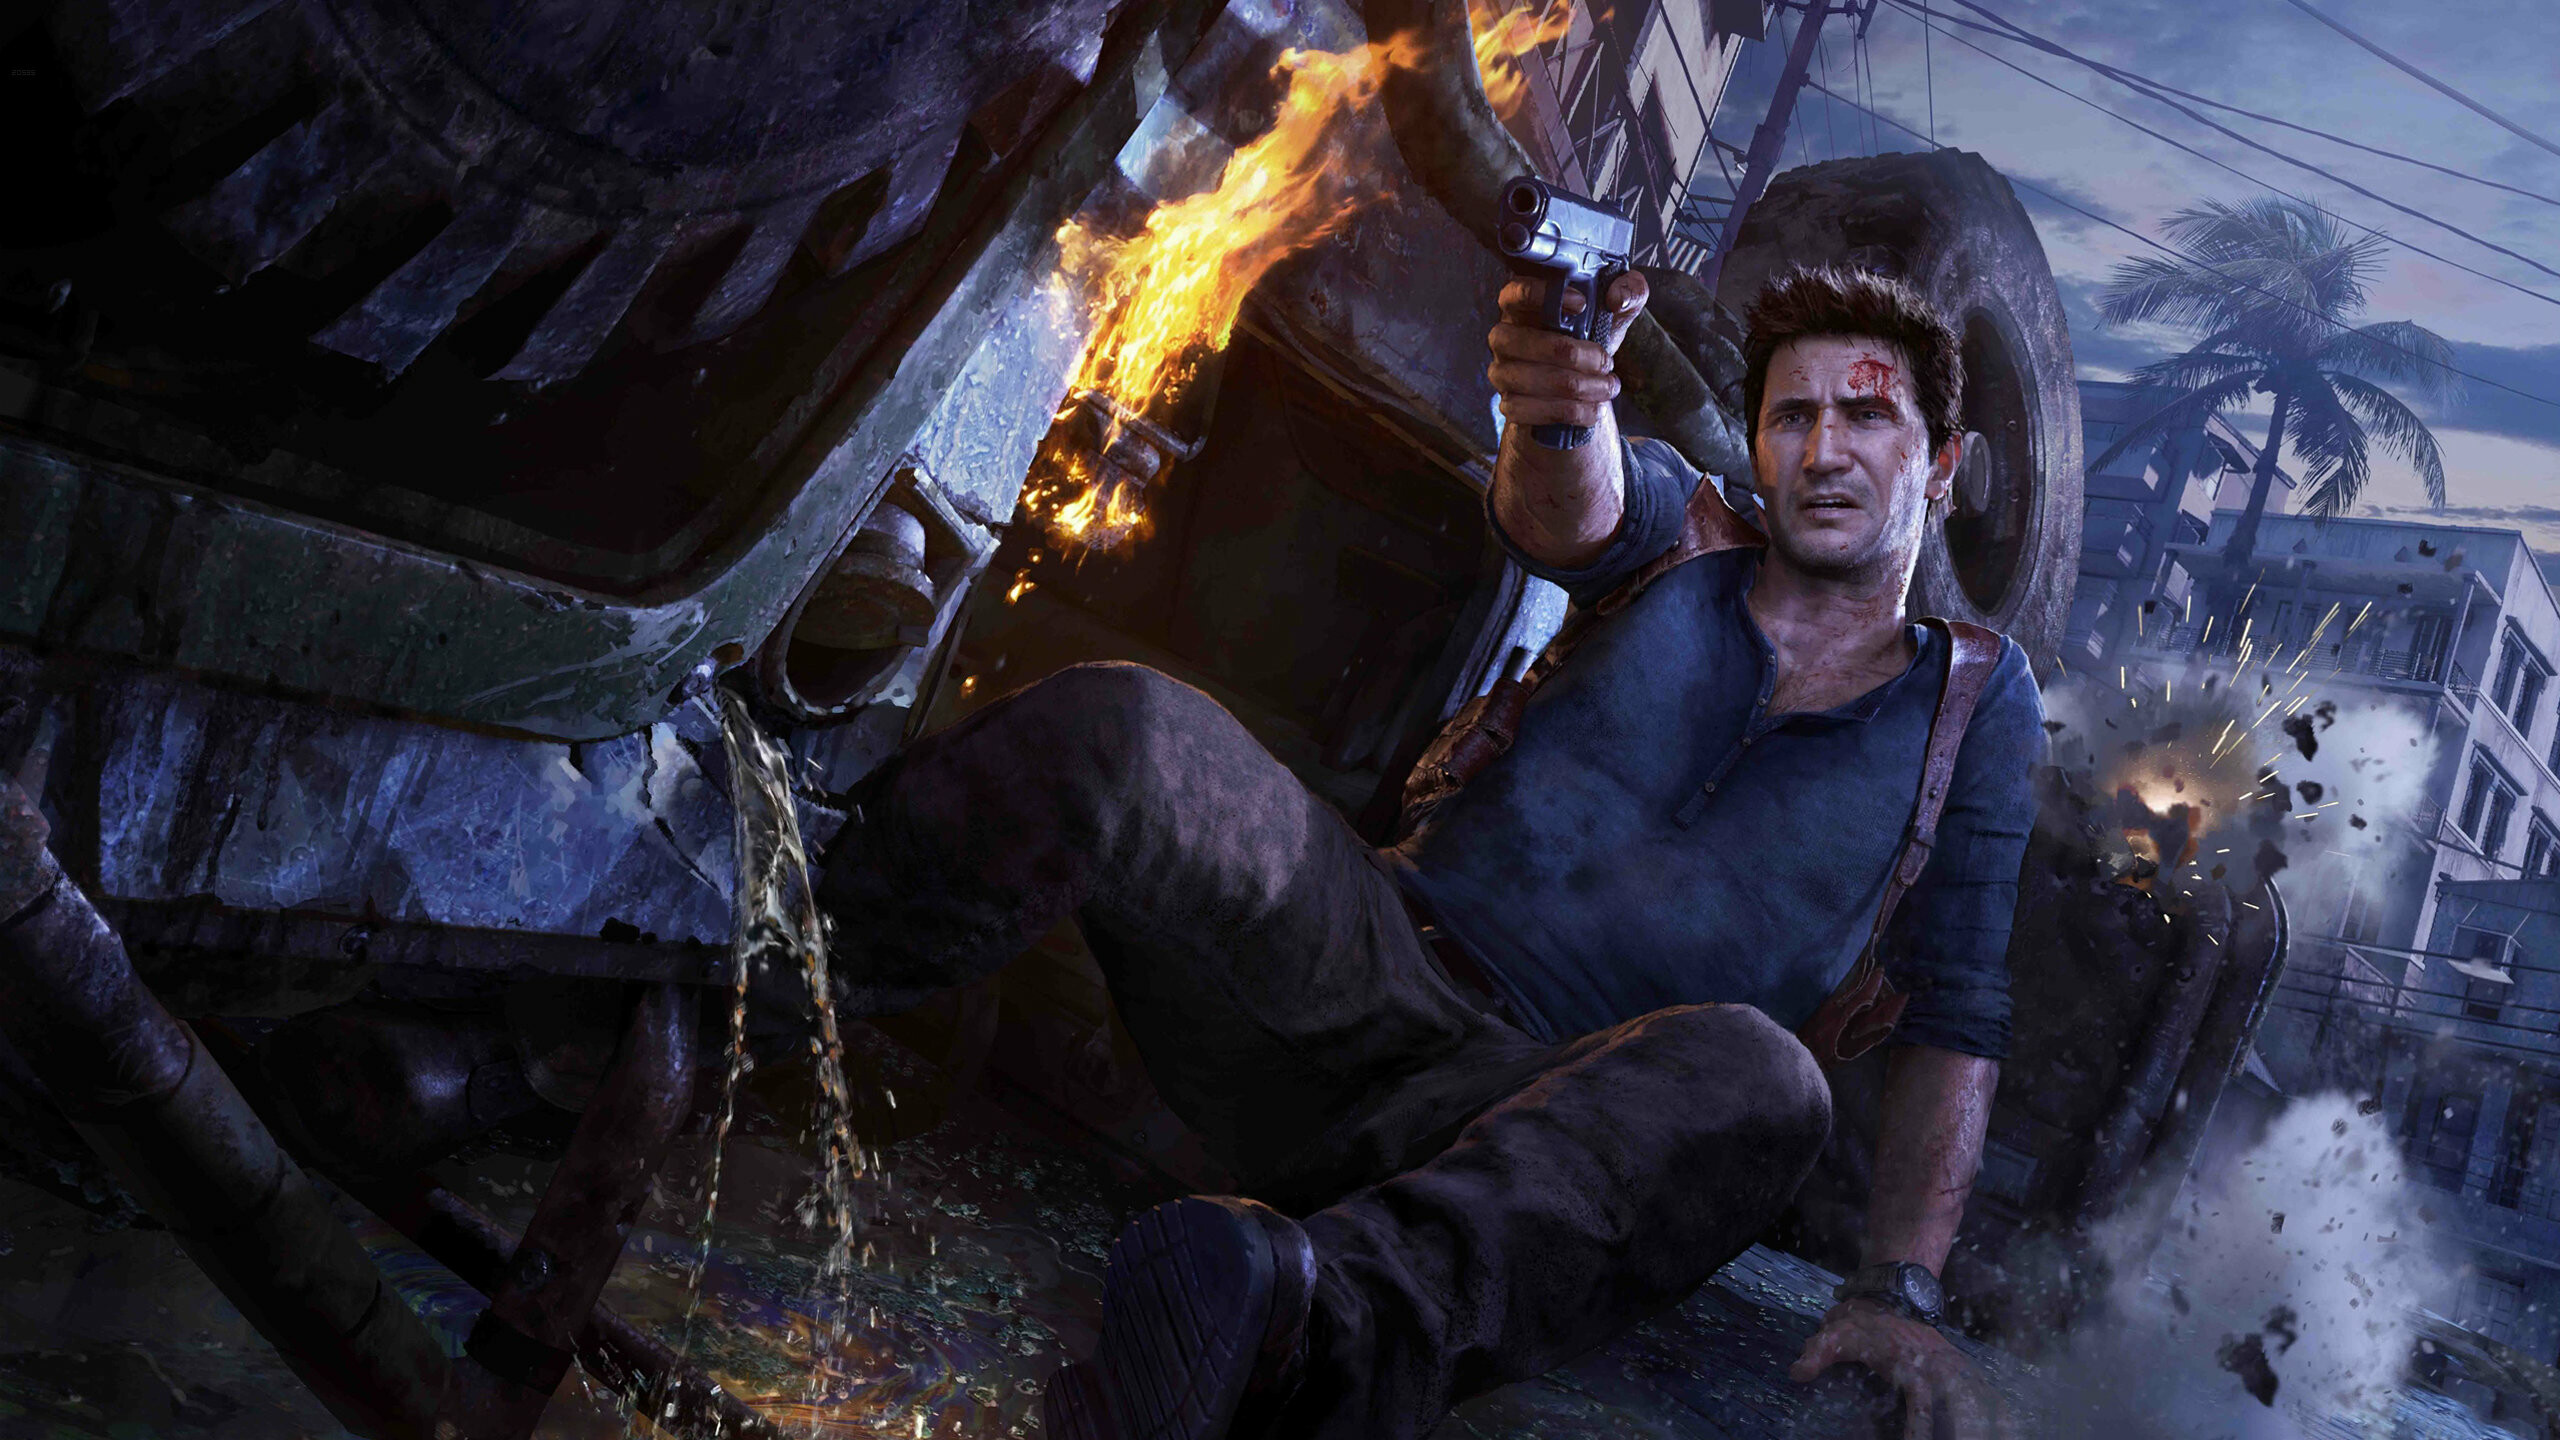 Uncharted: Nathan Drake, A charismatic and good-natured yet rebellious treasure hunter, The player controls Drake as he journeys across the world to uncover various historical mysteries. 2560x1440 HD Background.